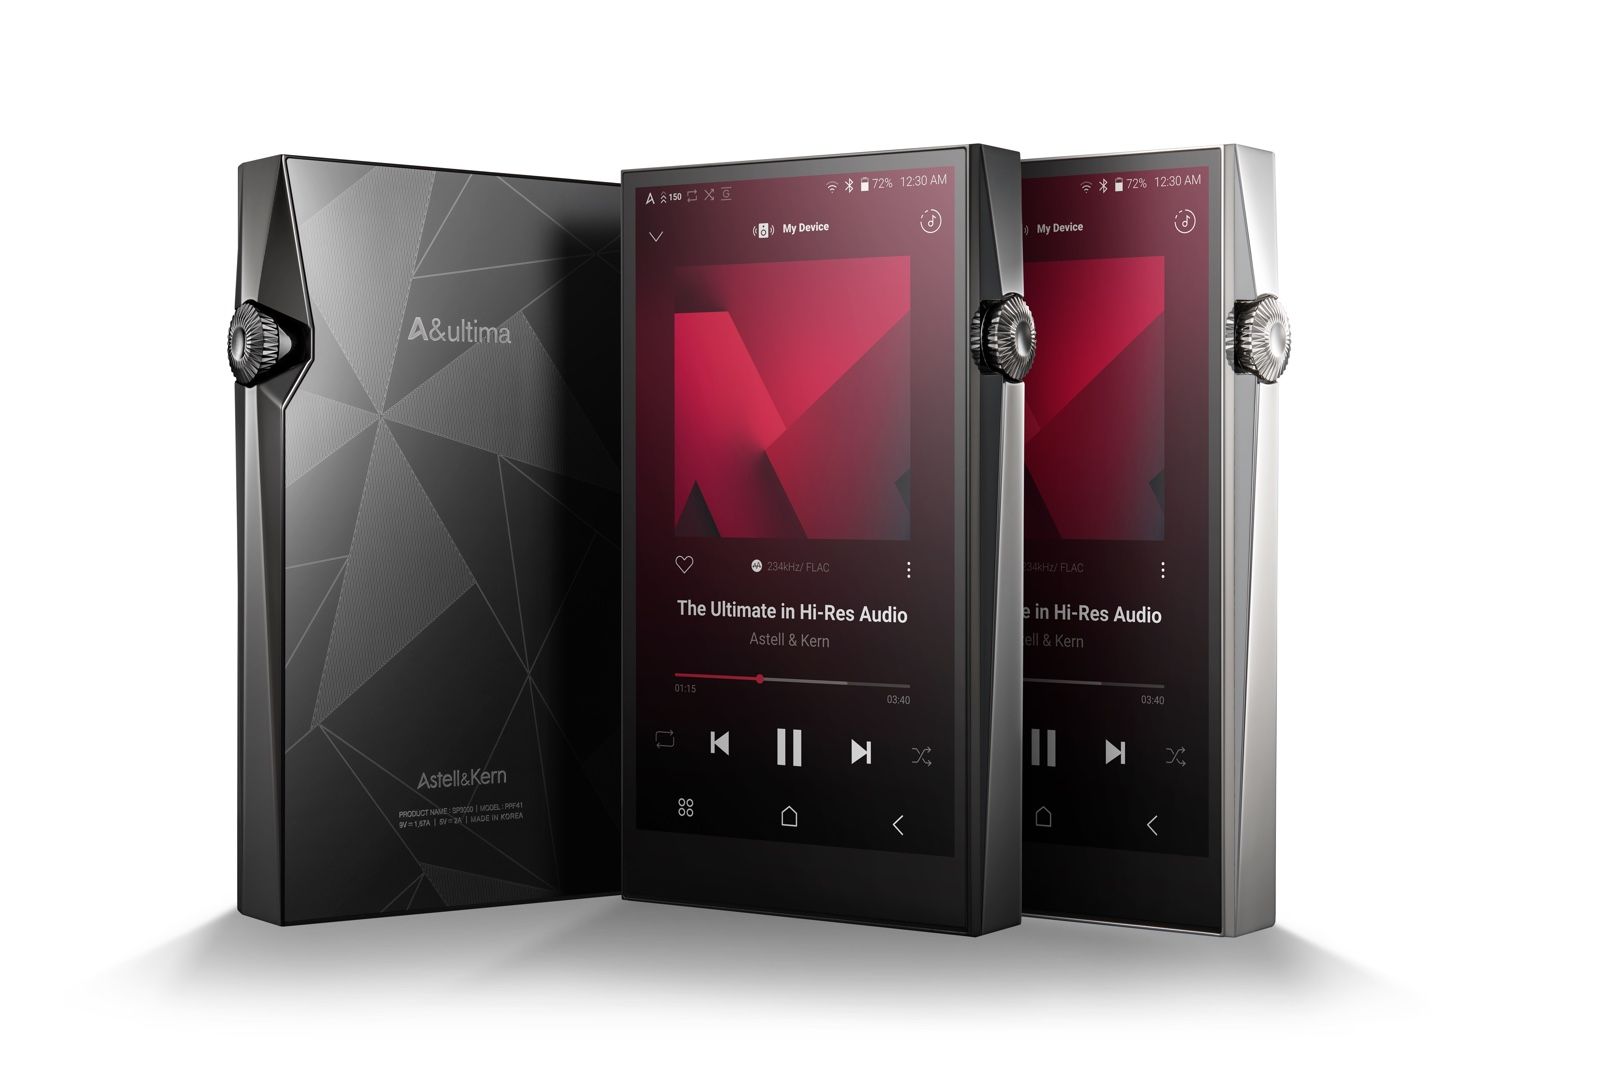 Astell & Kern A&ultima SP3000 photo 1